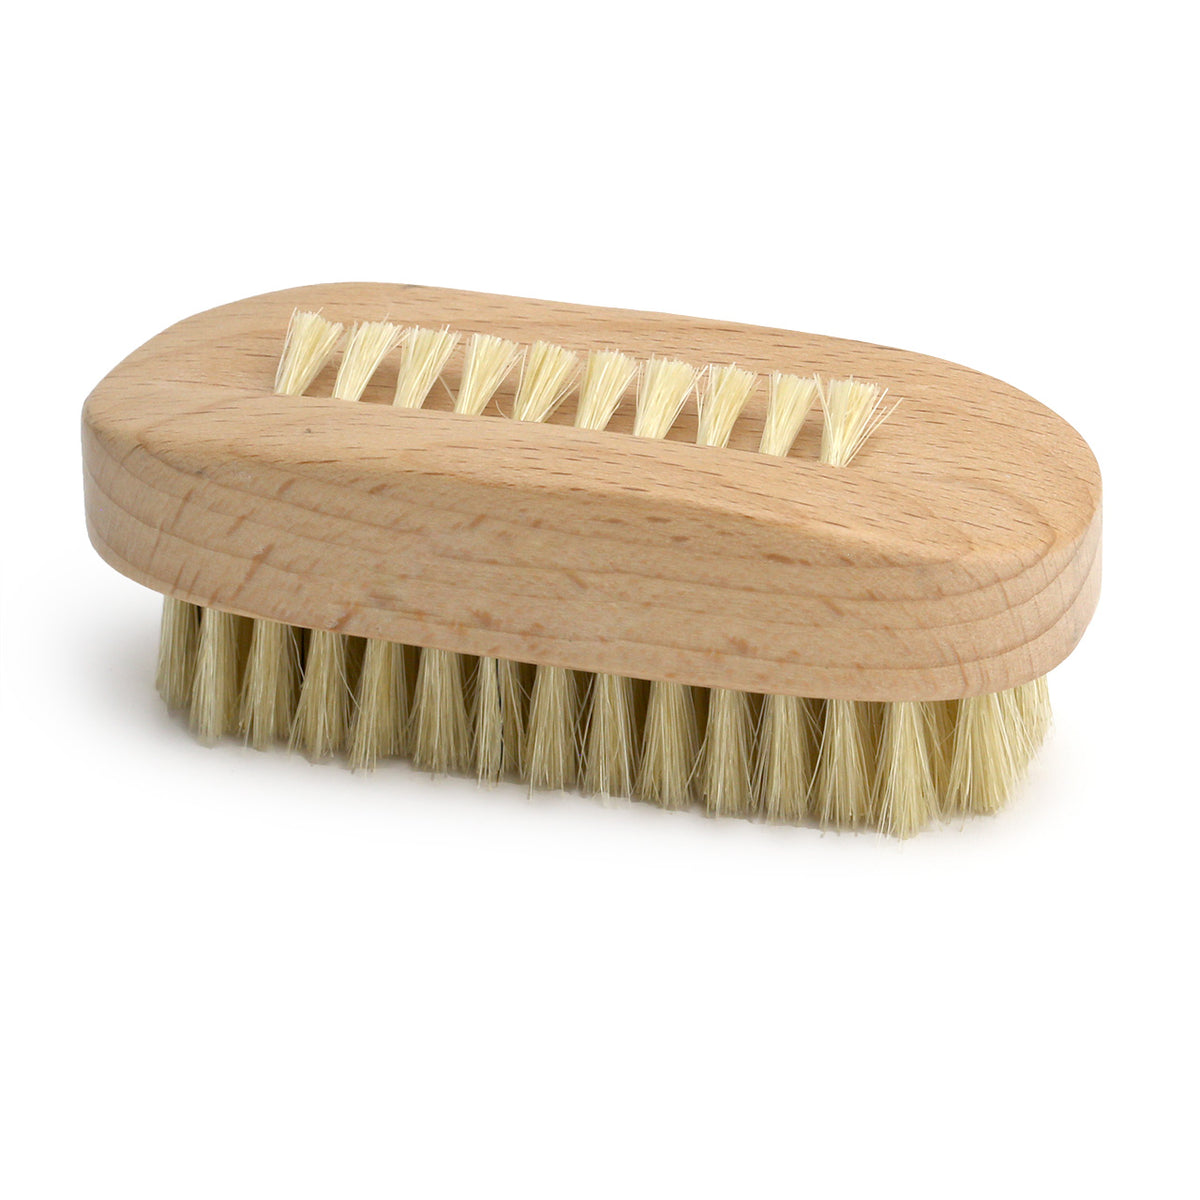 Natural colured timber nail brush  with stiff boar hair bristles - three quarter view of long edge and top